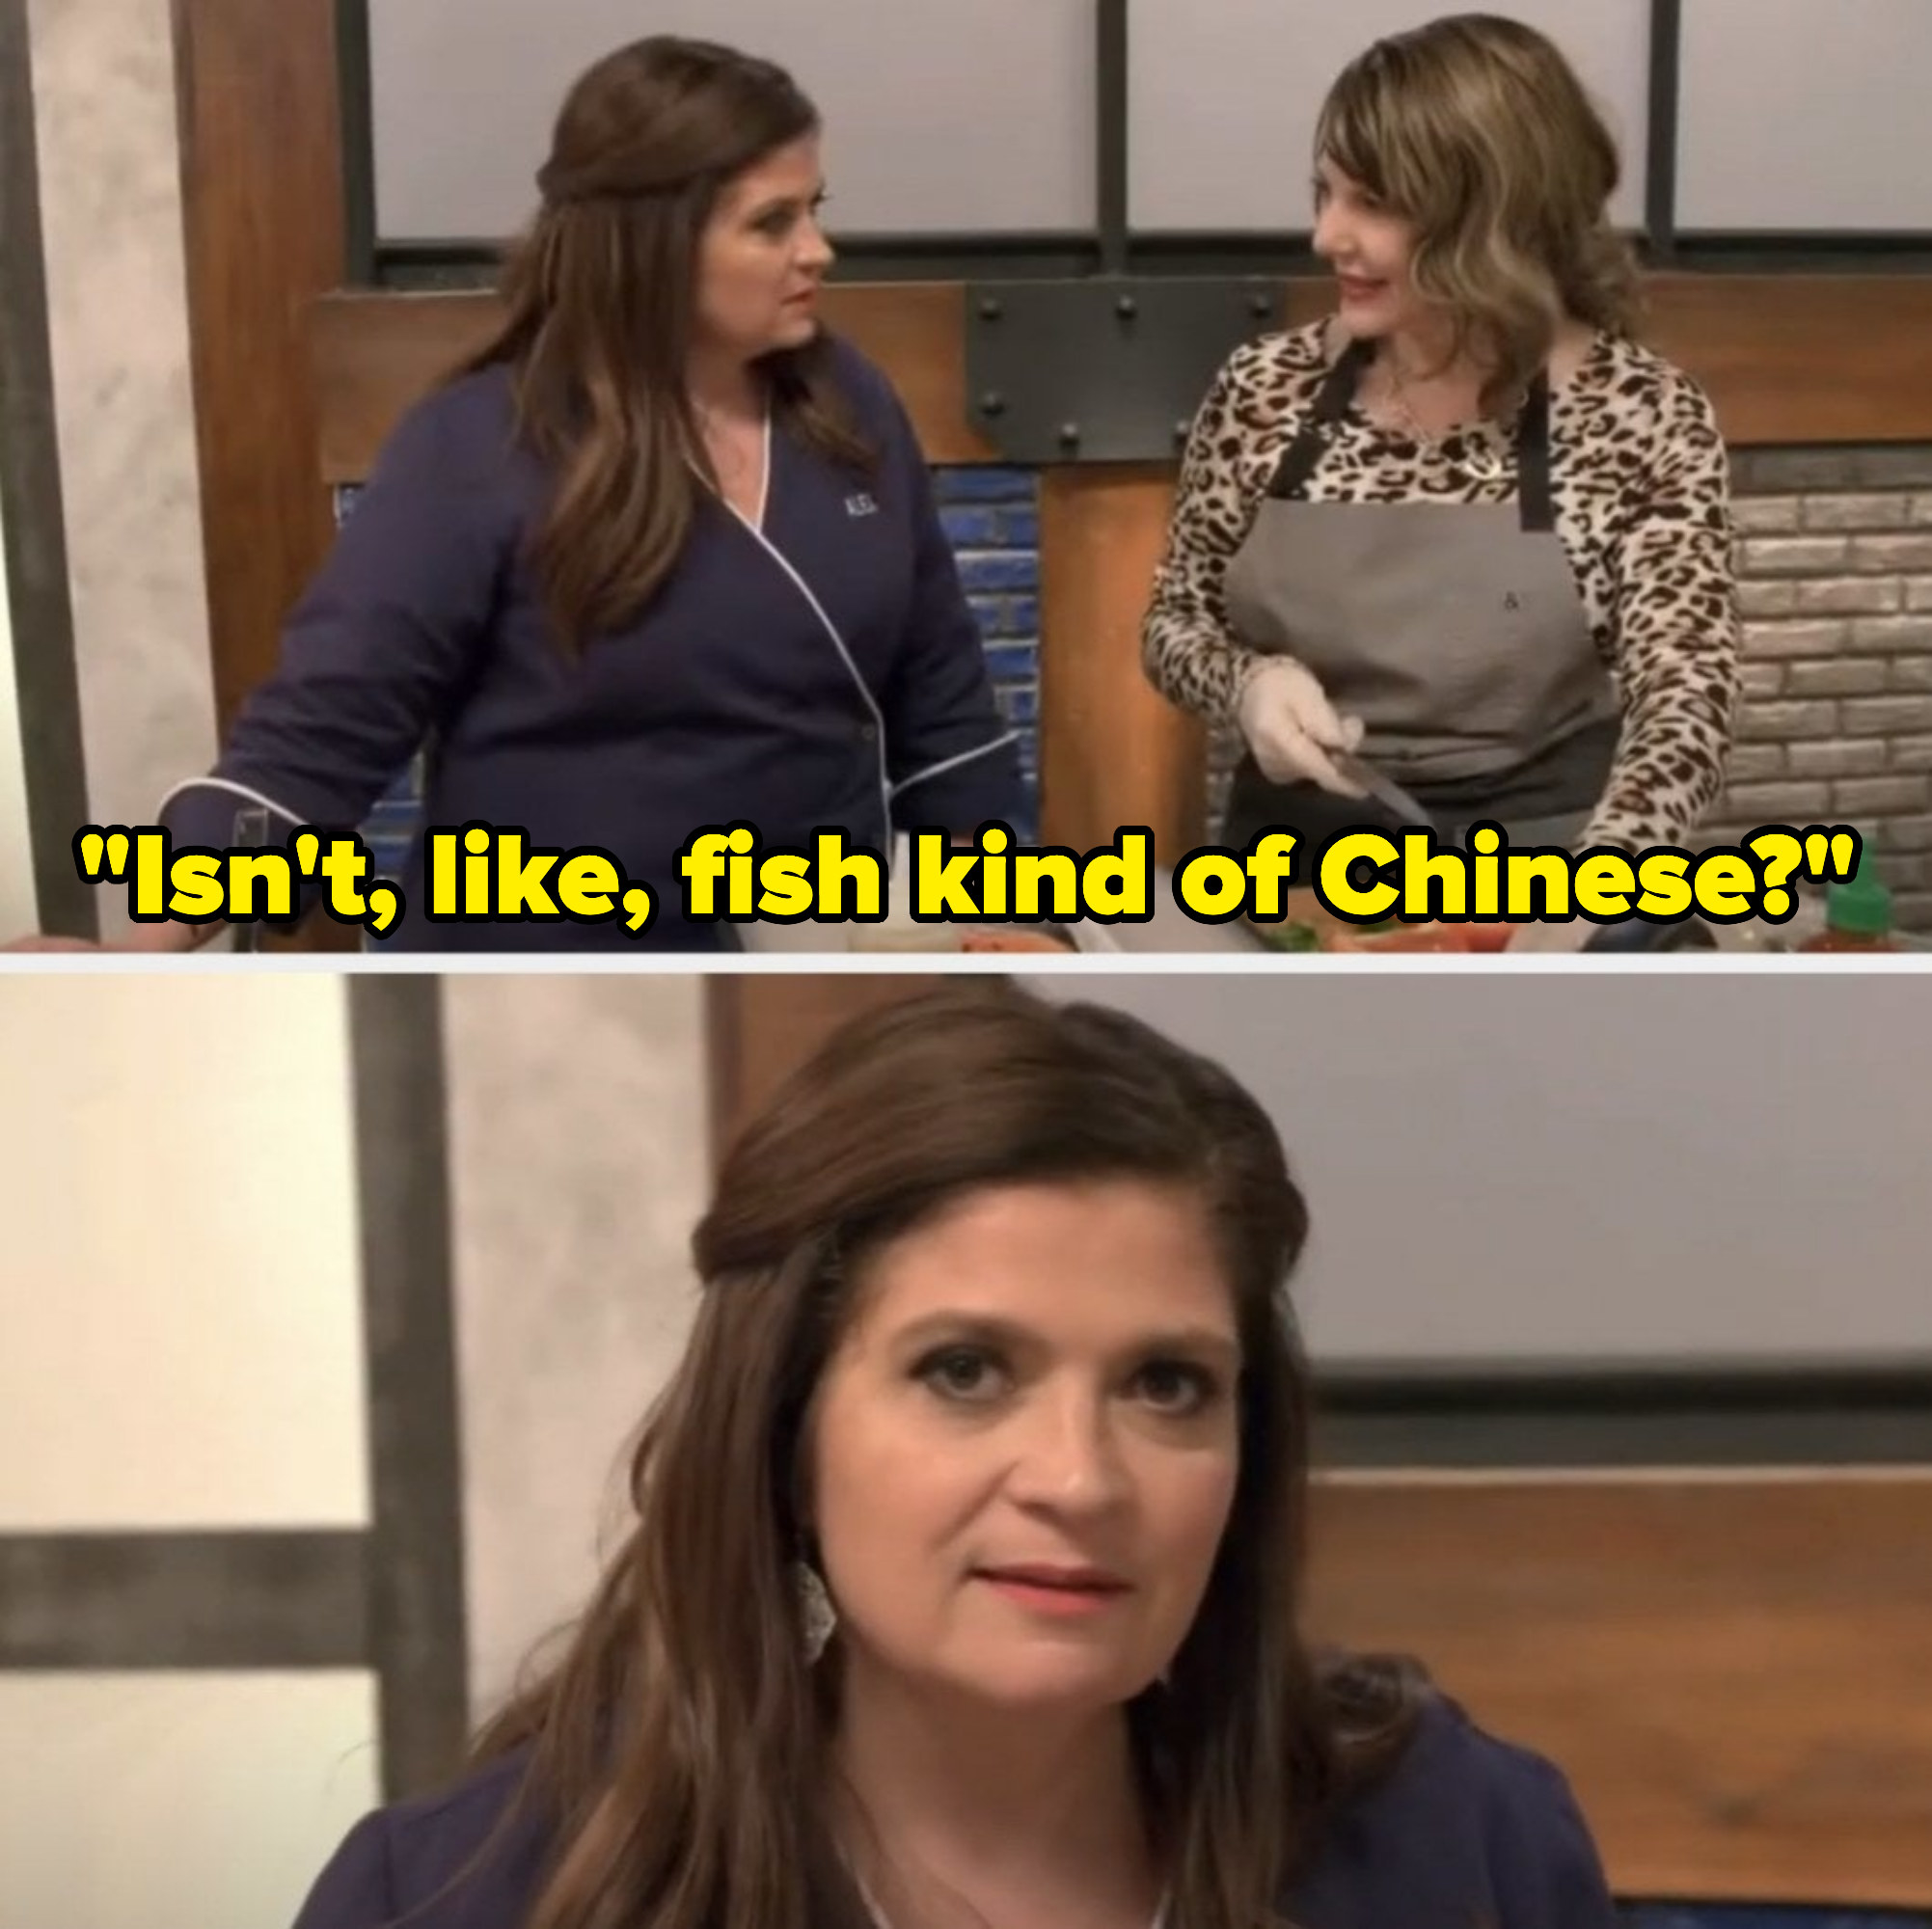 a woman asks if fish is Chinese